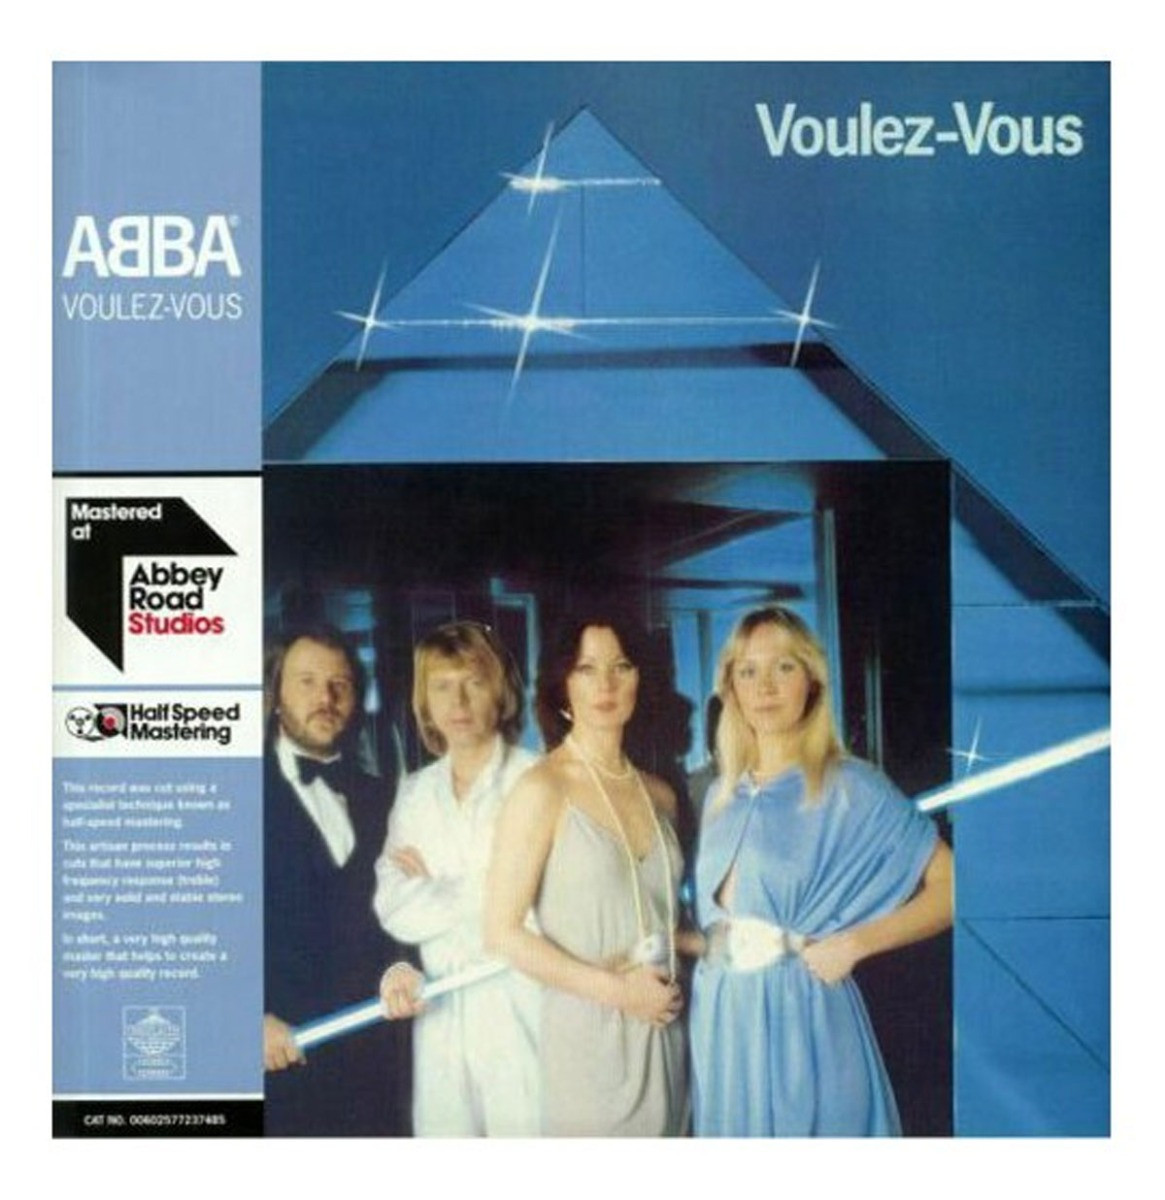 ABBA - Voulez-Vous 2-LP - Mastered At Abbey Road Studios - Limited Edition